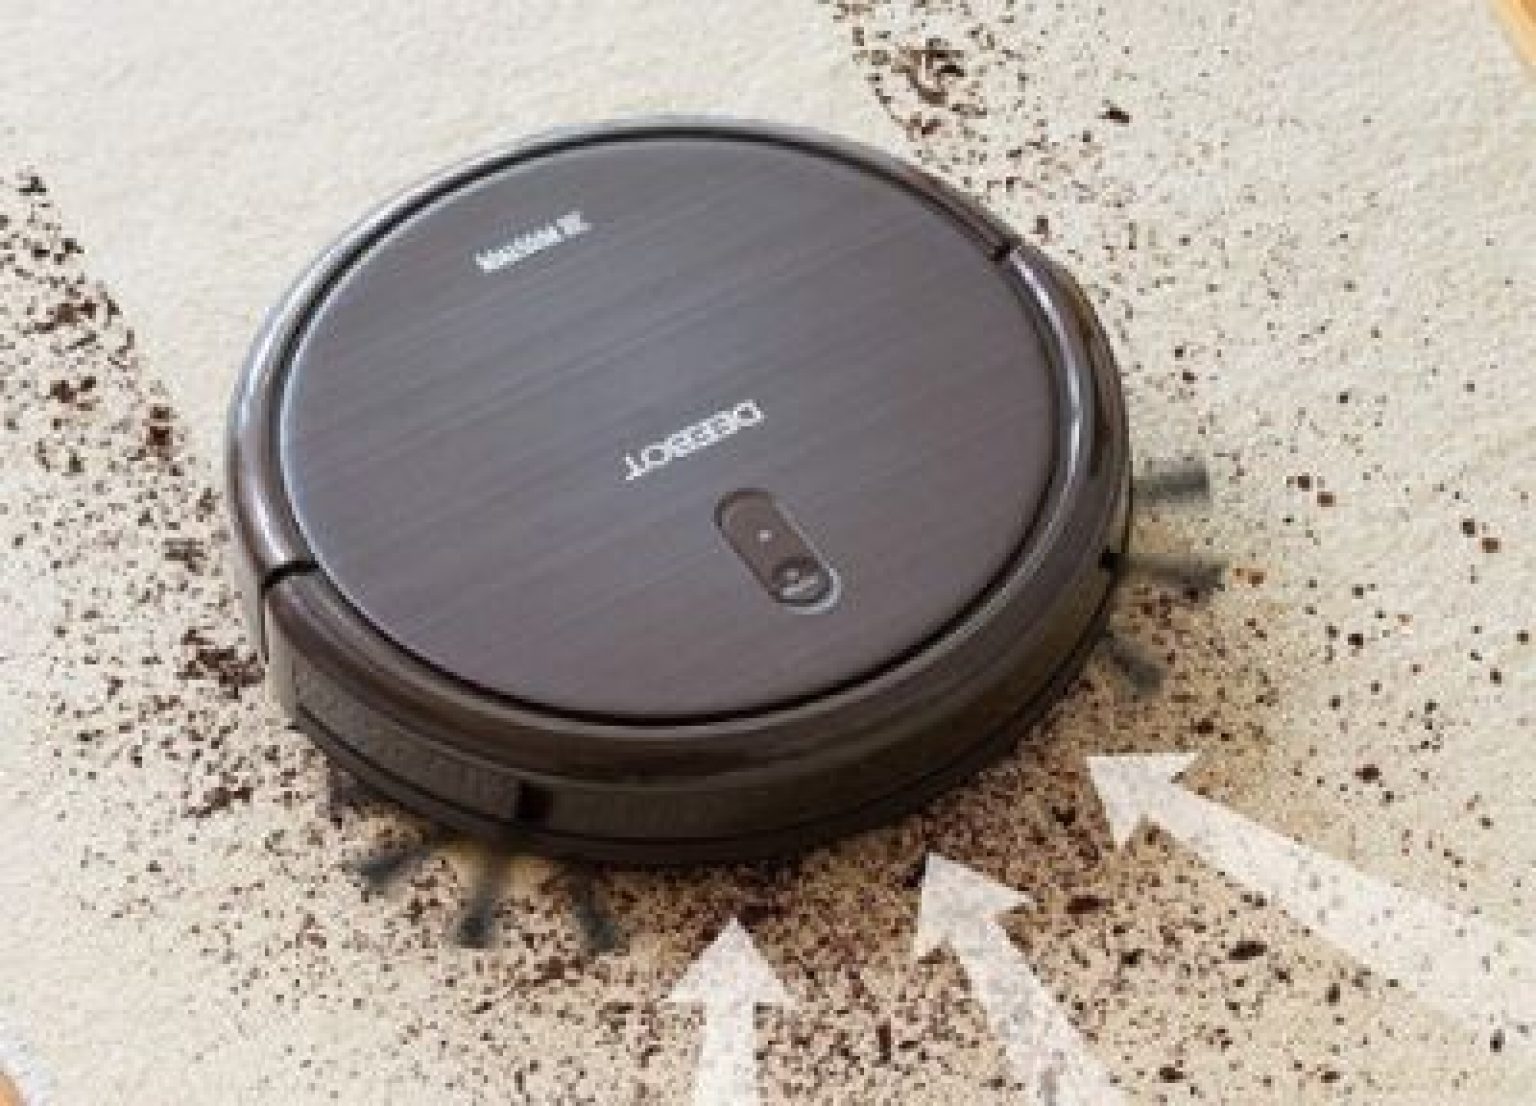 Top 9 Best Highest Rated Robotic Vacuums In 2021